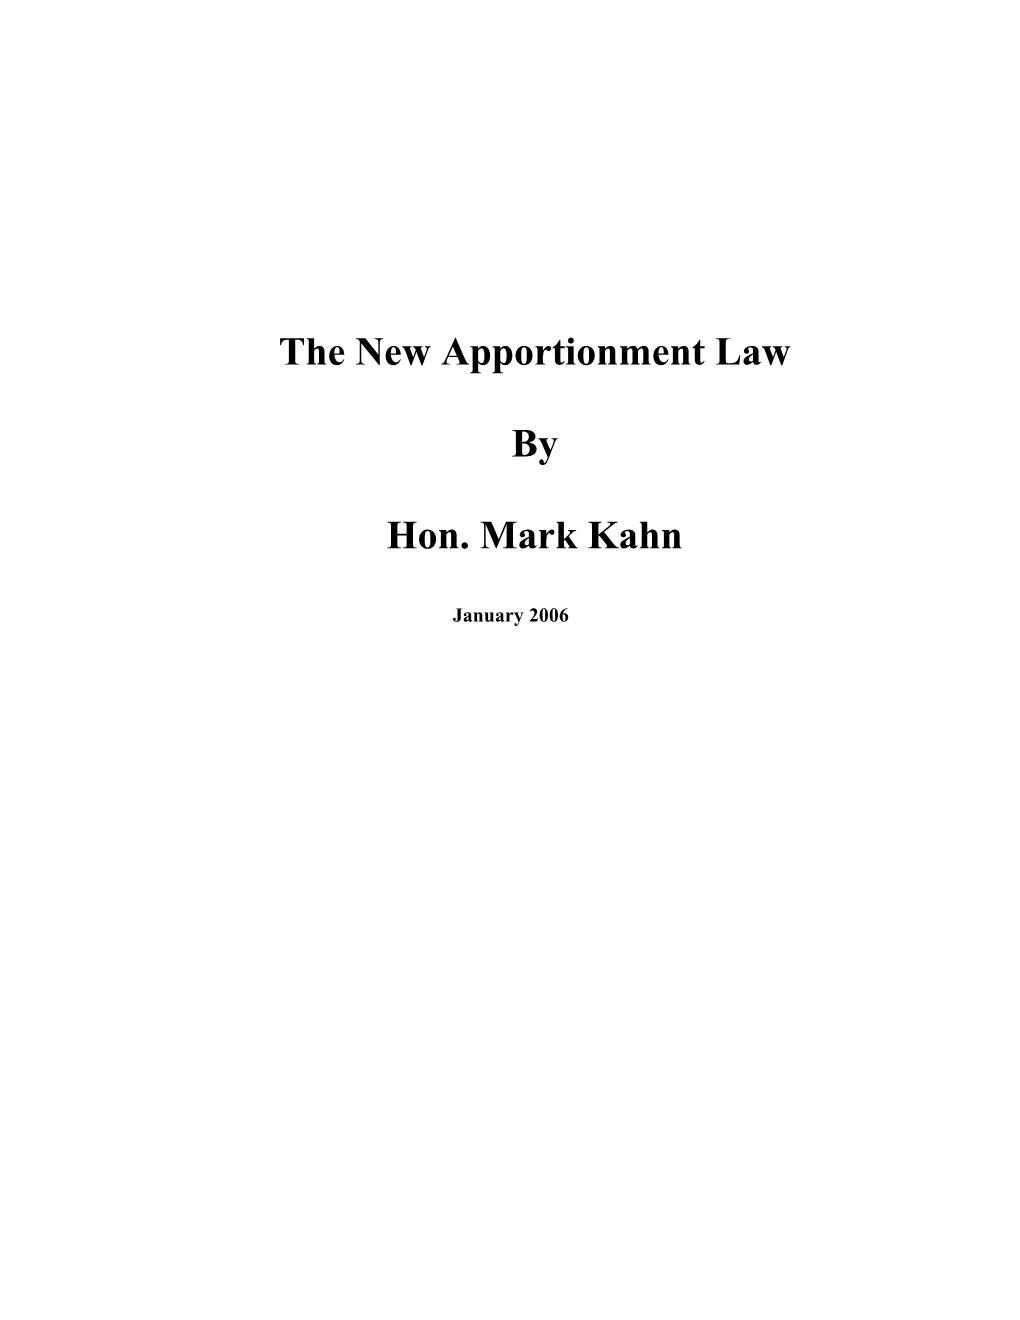 The New Apportionment Law